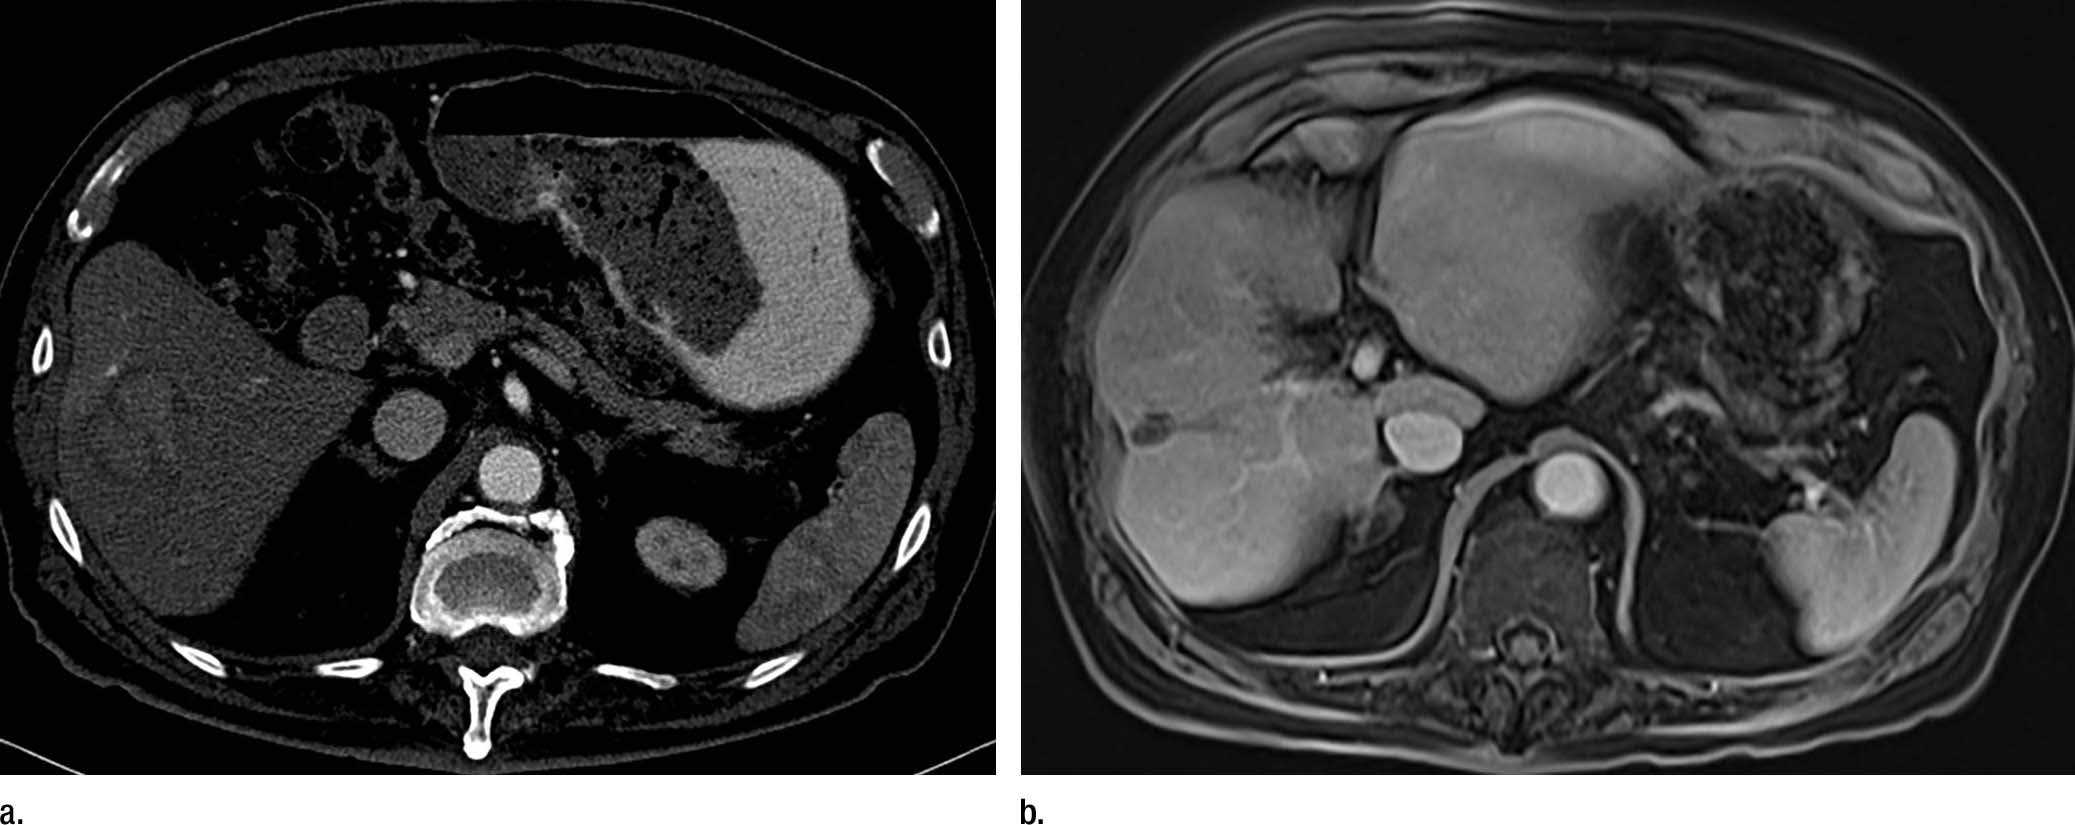 Images show (a) contrast material-enhanced CT scan before yttrium 90 of an 87-year-old man with 4-cm hepatocellular carcinoma in right lobe. (b) Contrast-enhanced MR image at subsequent 9-year follow-up (now aged 96 years) shows complete necrosis.